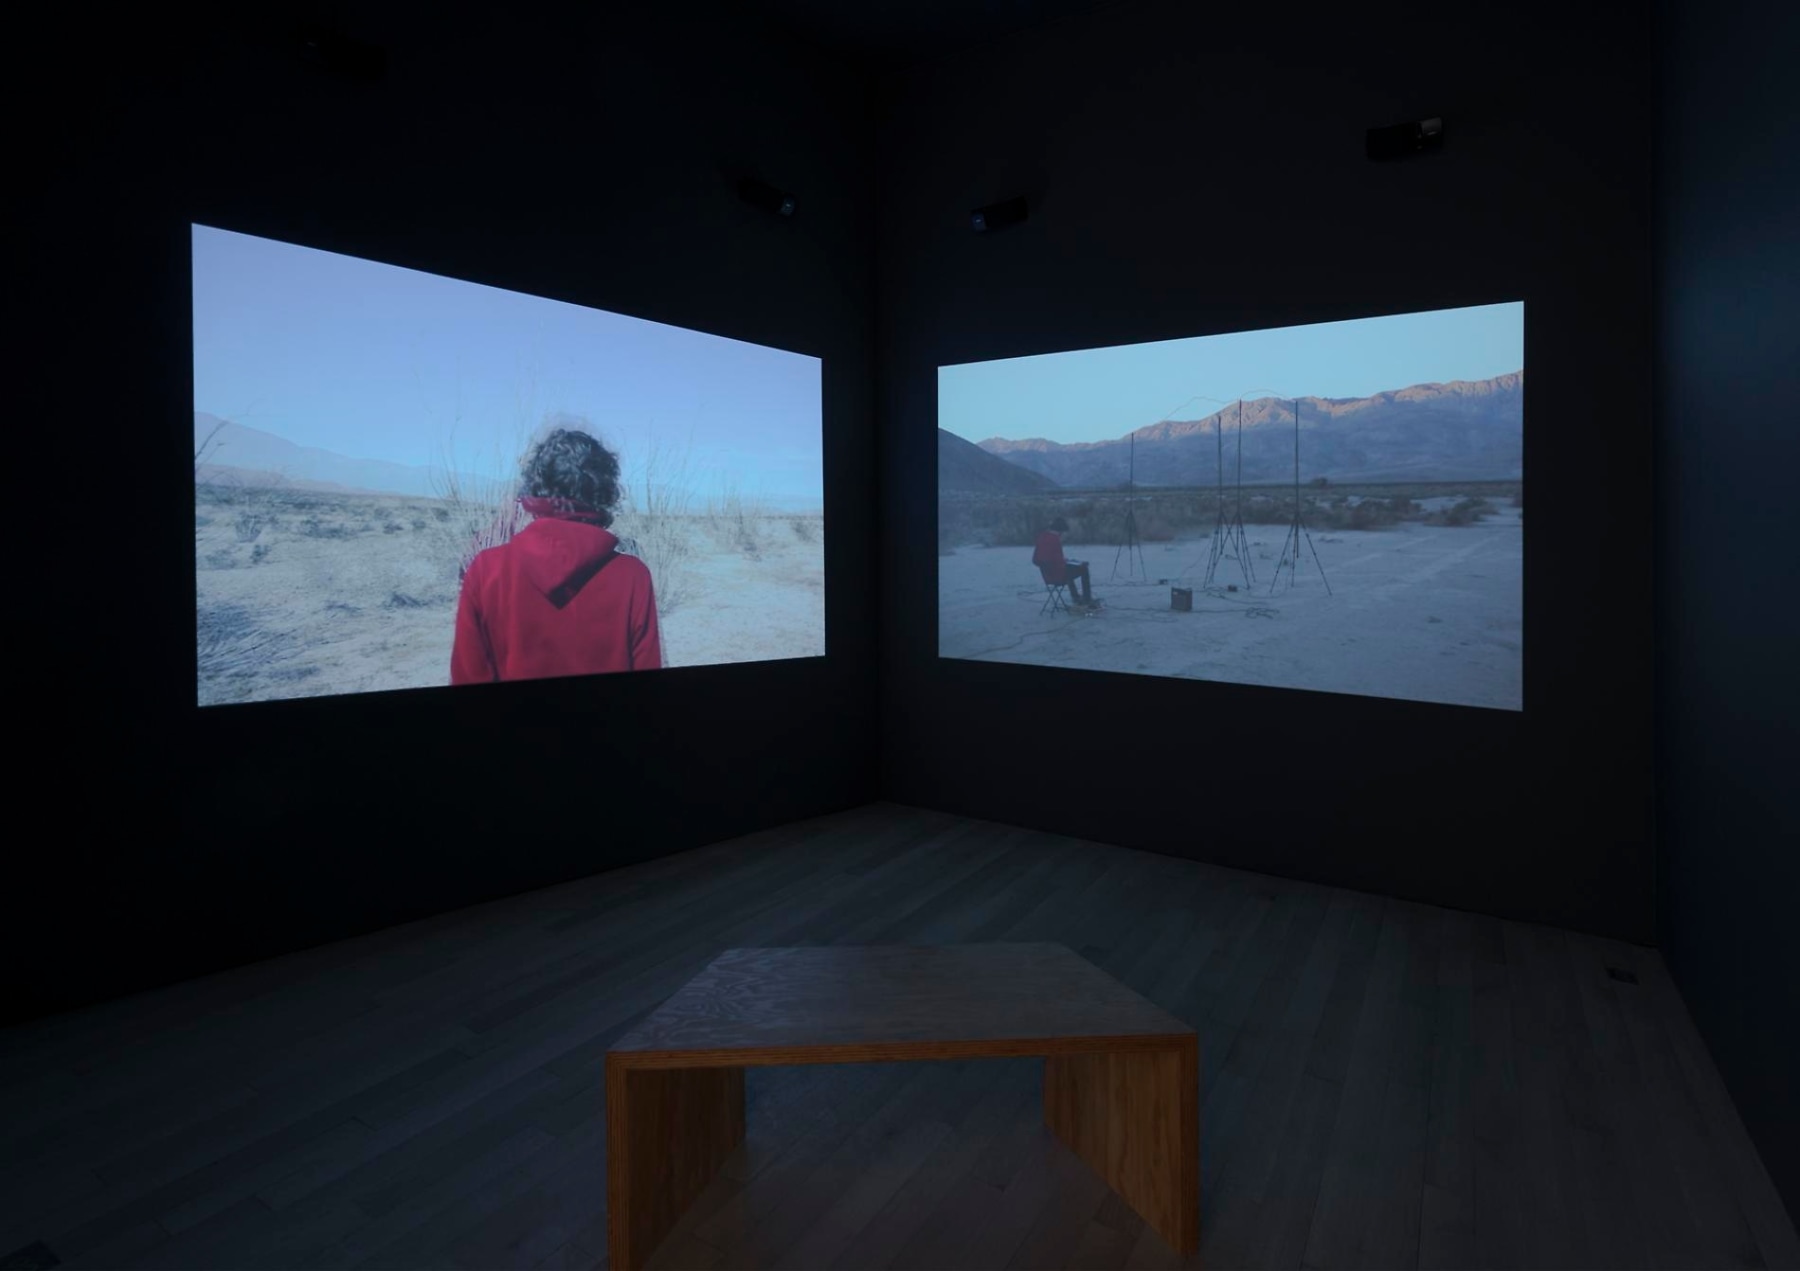 installation view of two video projections